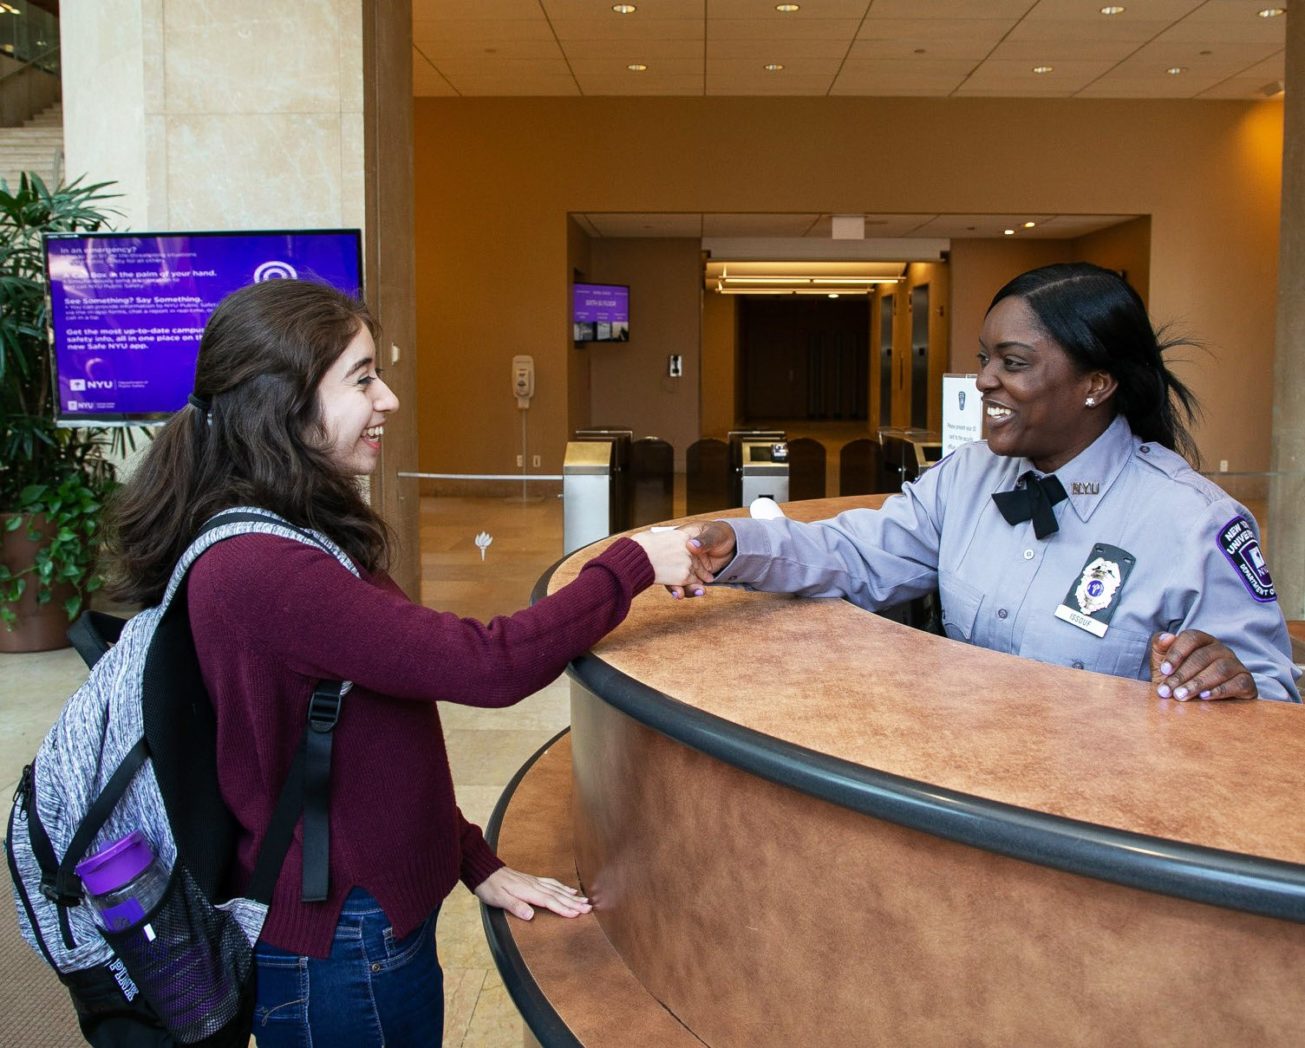 NYU student shaking hands with a Public safety officer who is sitting behind their desk